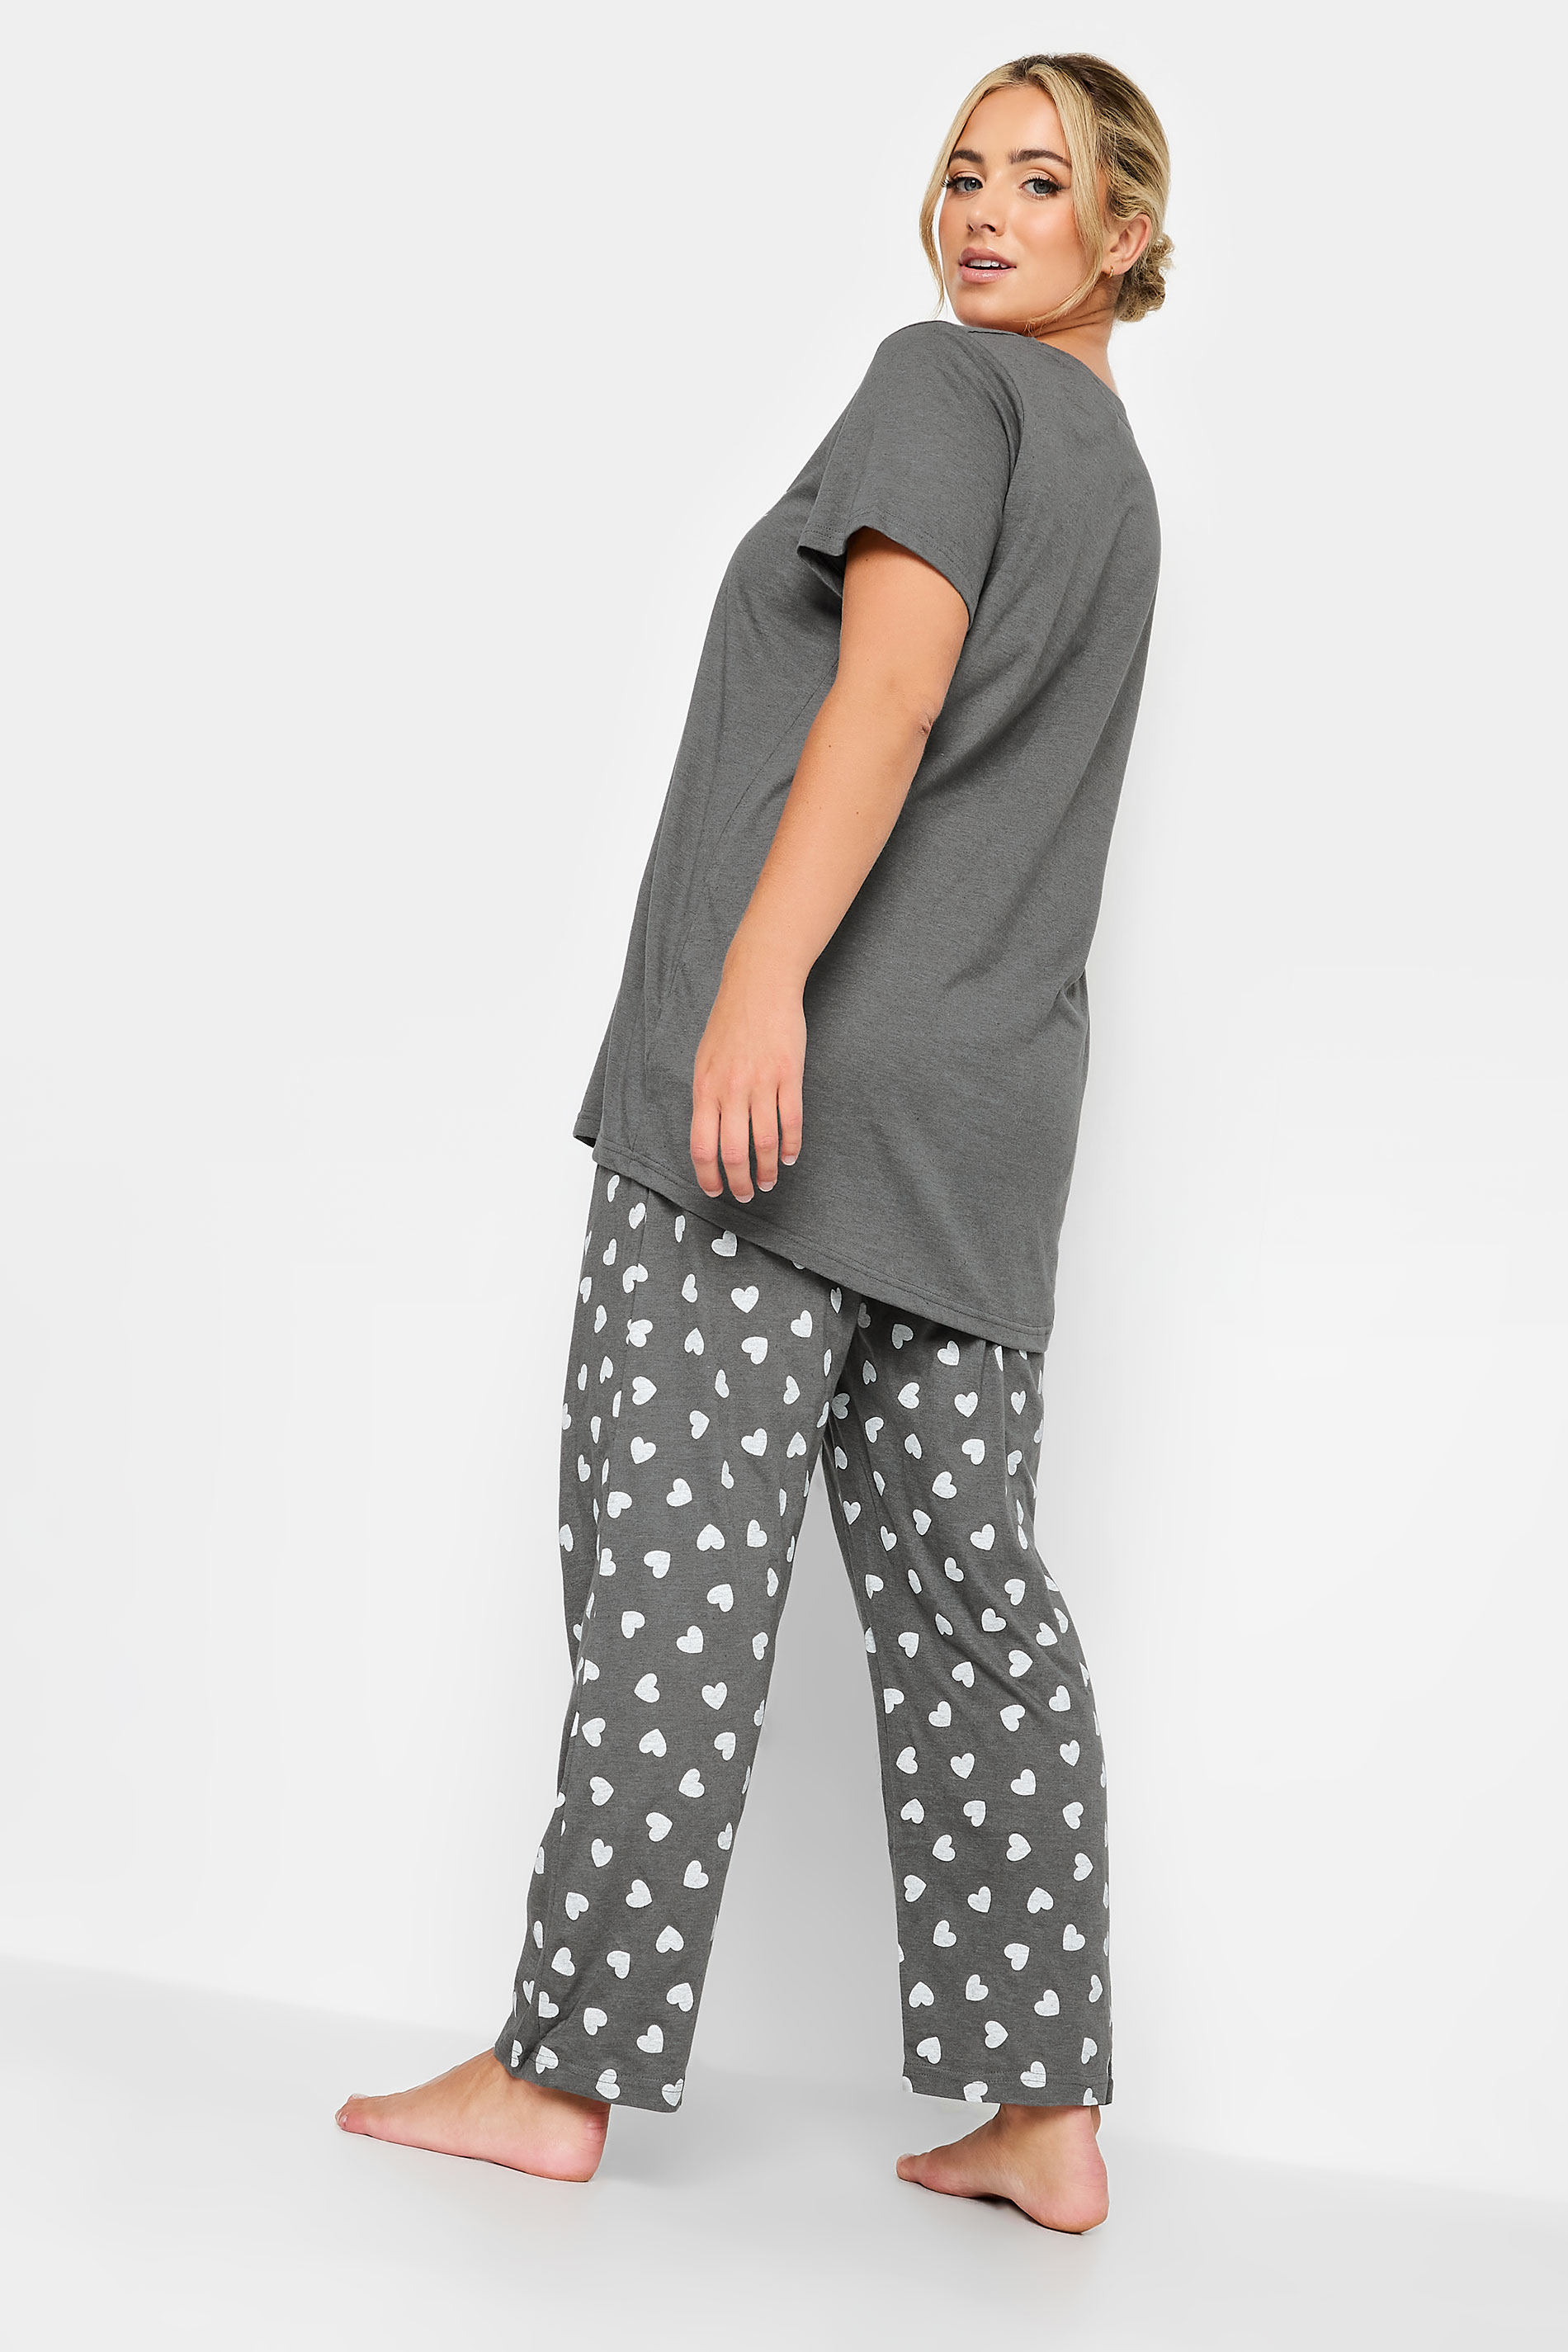 YOURS Curve Grey 'Head in the Clouds' Slogan Pyjama Set | Yours Clothing 3